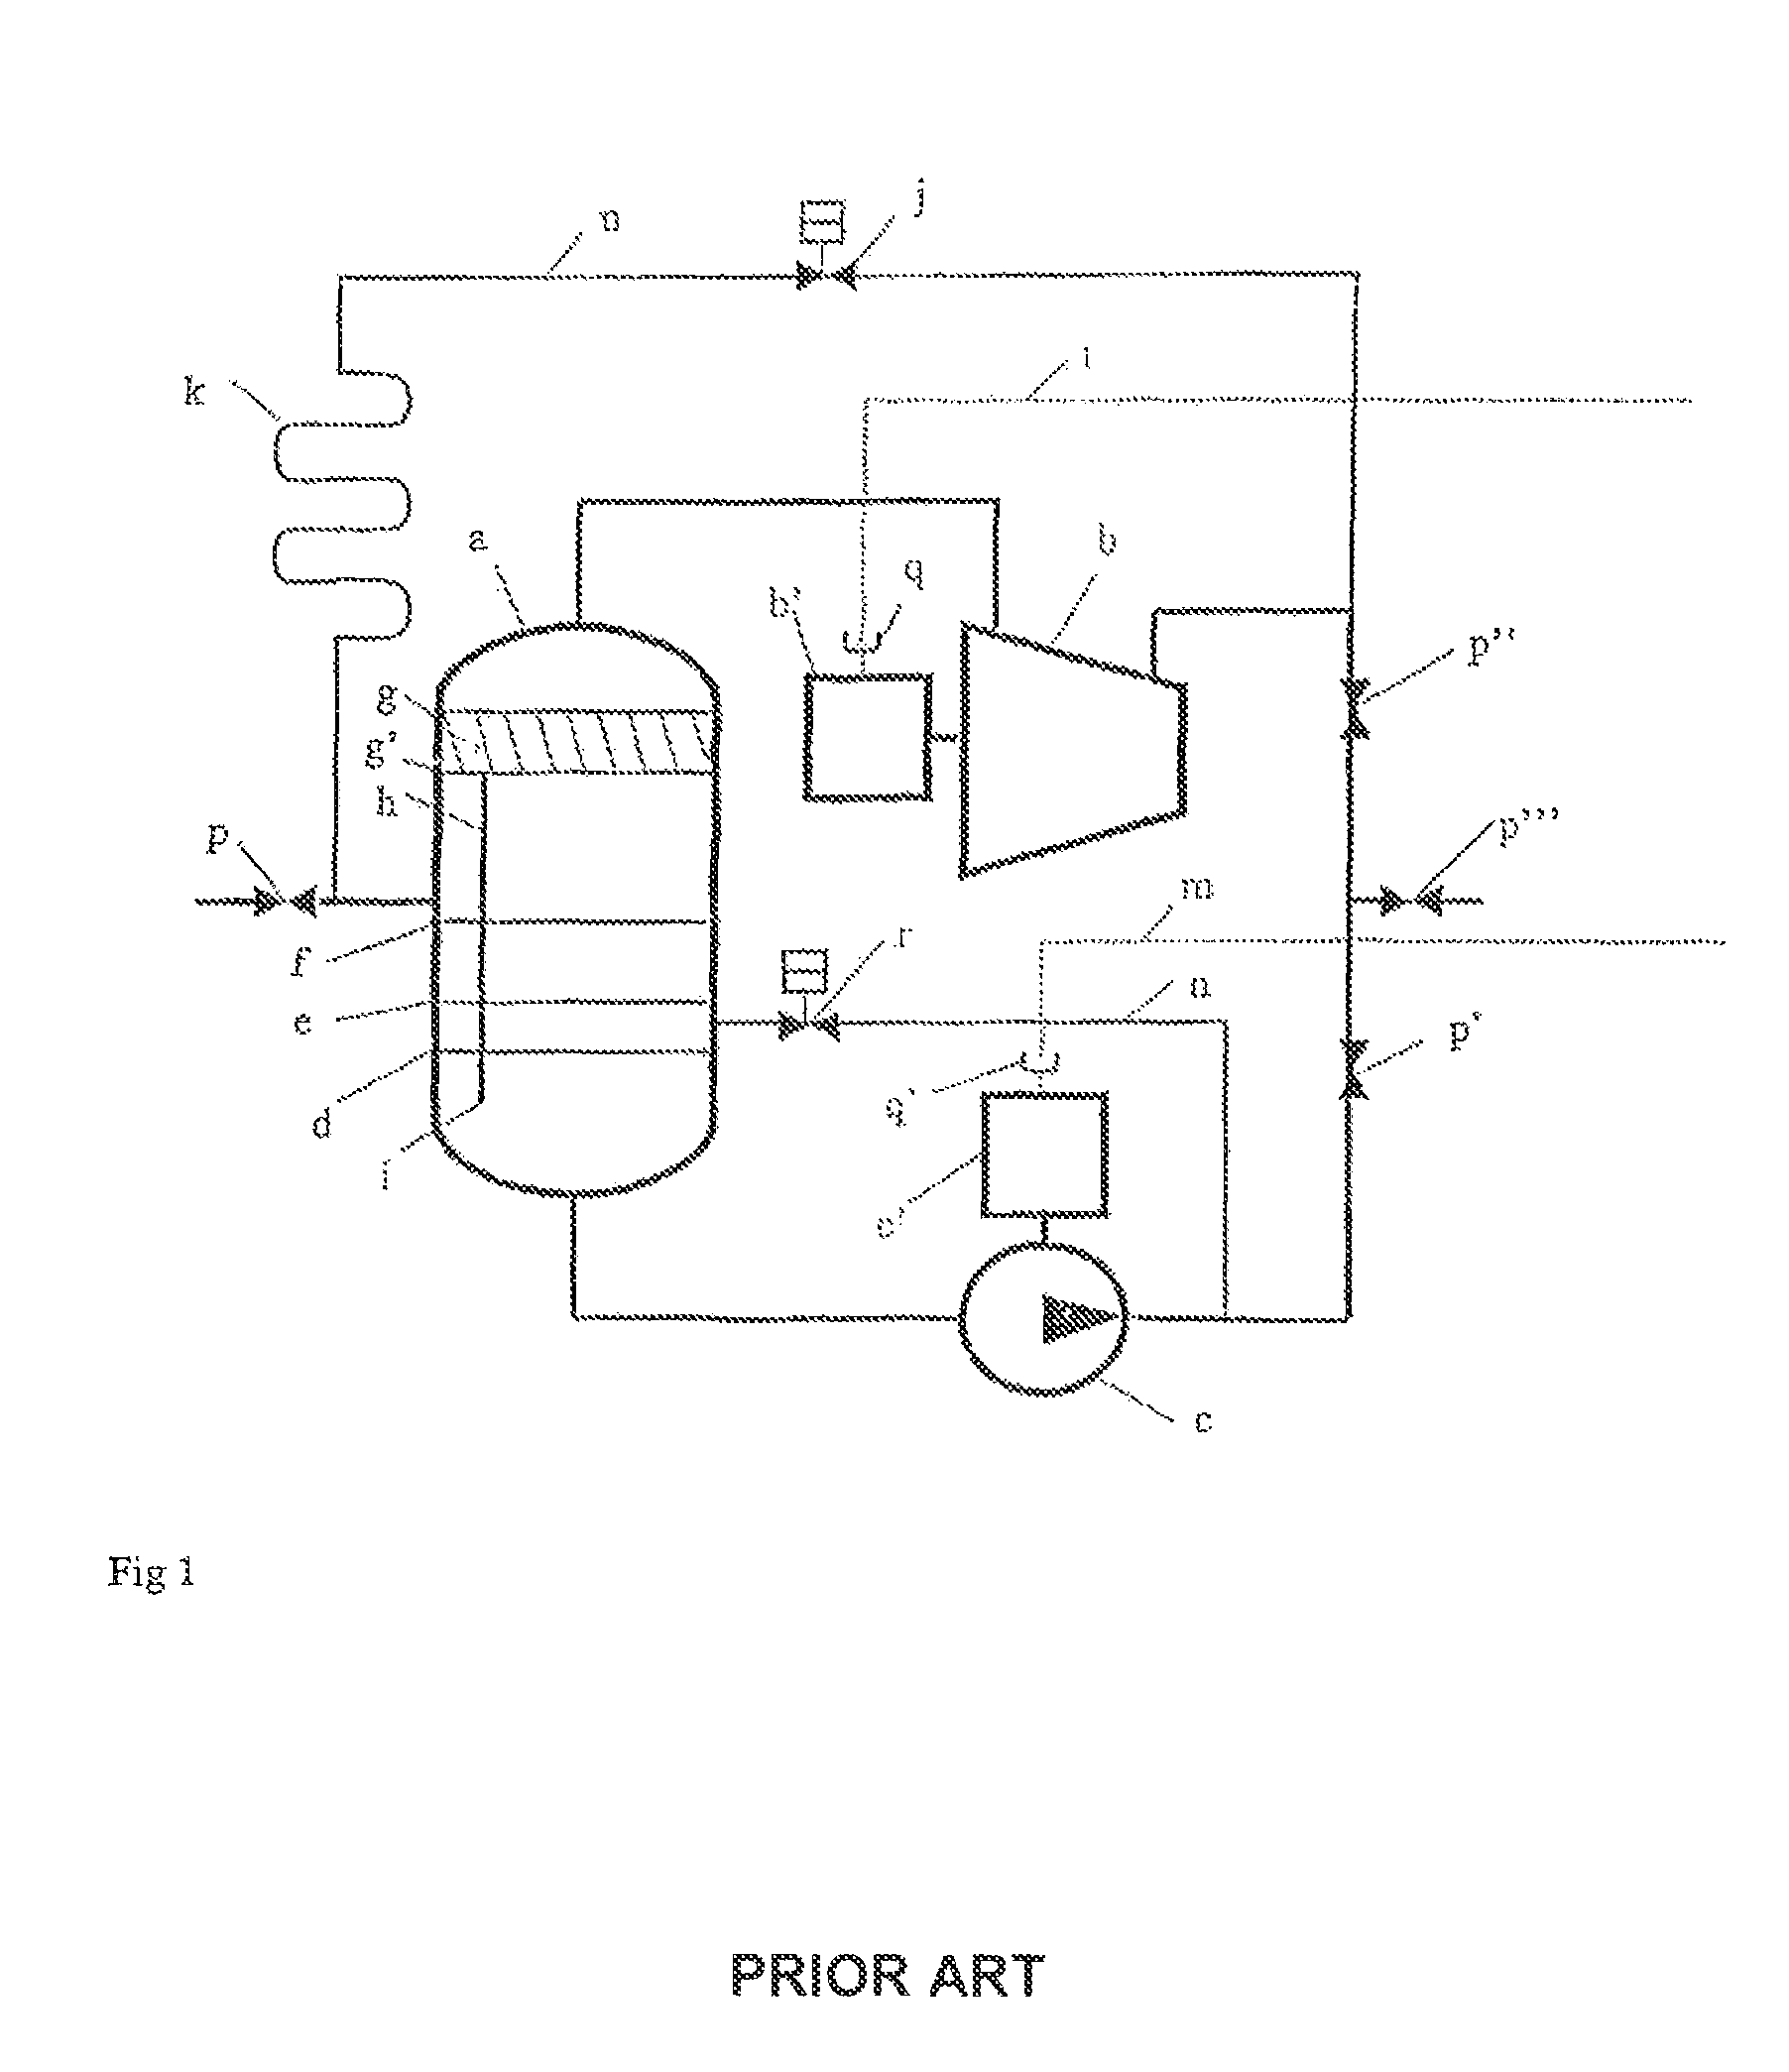 Device for separating and collecting fluid in gas from a reservoir